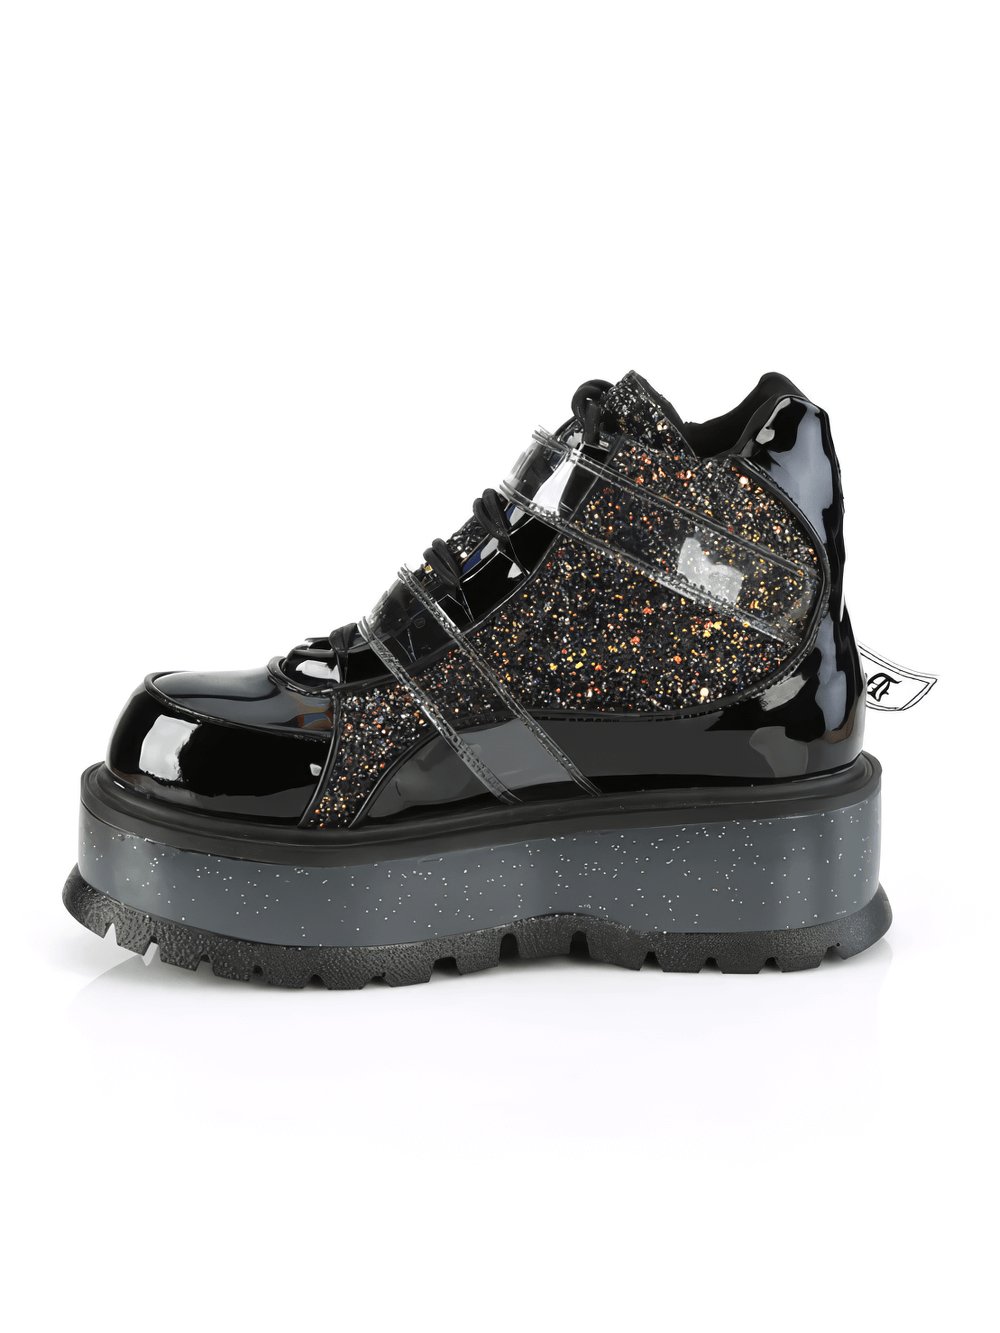 DEMONIA Black Multi-Glitter Ankle Boots with Snap Buckles